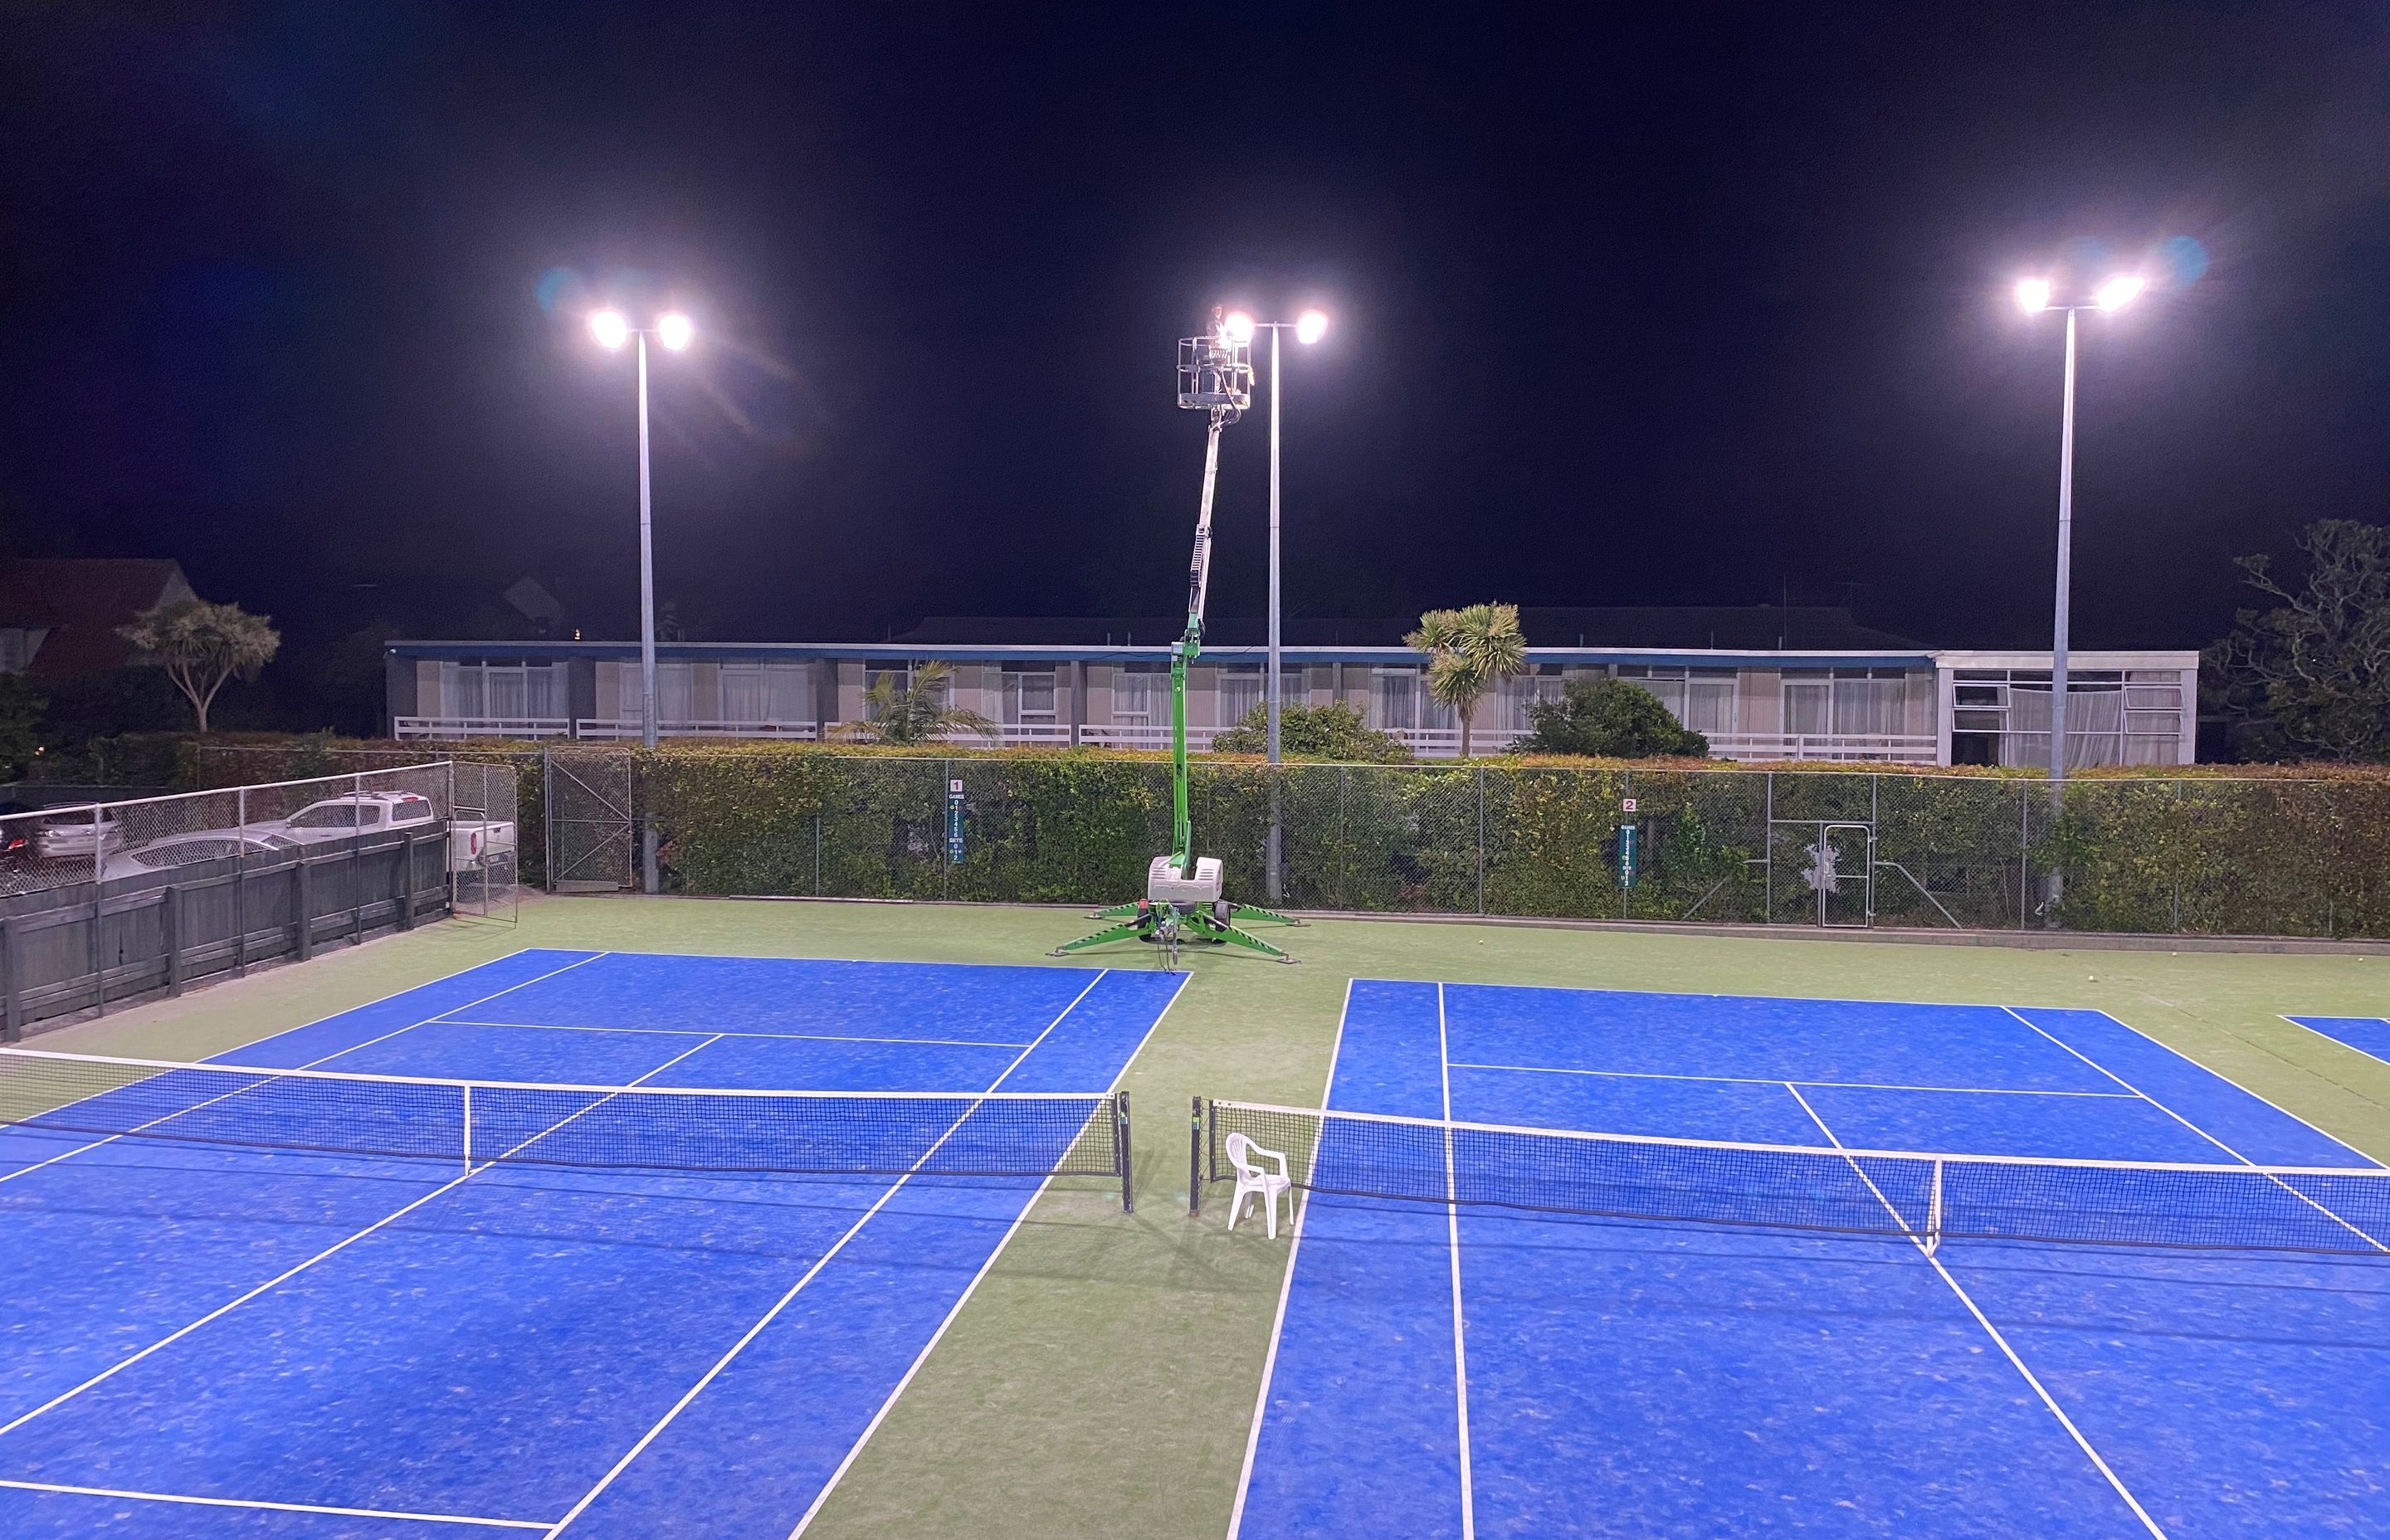 In sporting applications, creating an even light effect is paramount. For this project, at the Royal Oak Racquets Club in Auckland, Lighting Solutions achieved a uniform 350 lux across all five tennis courts.